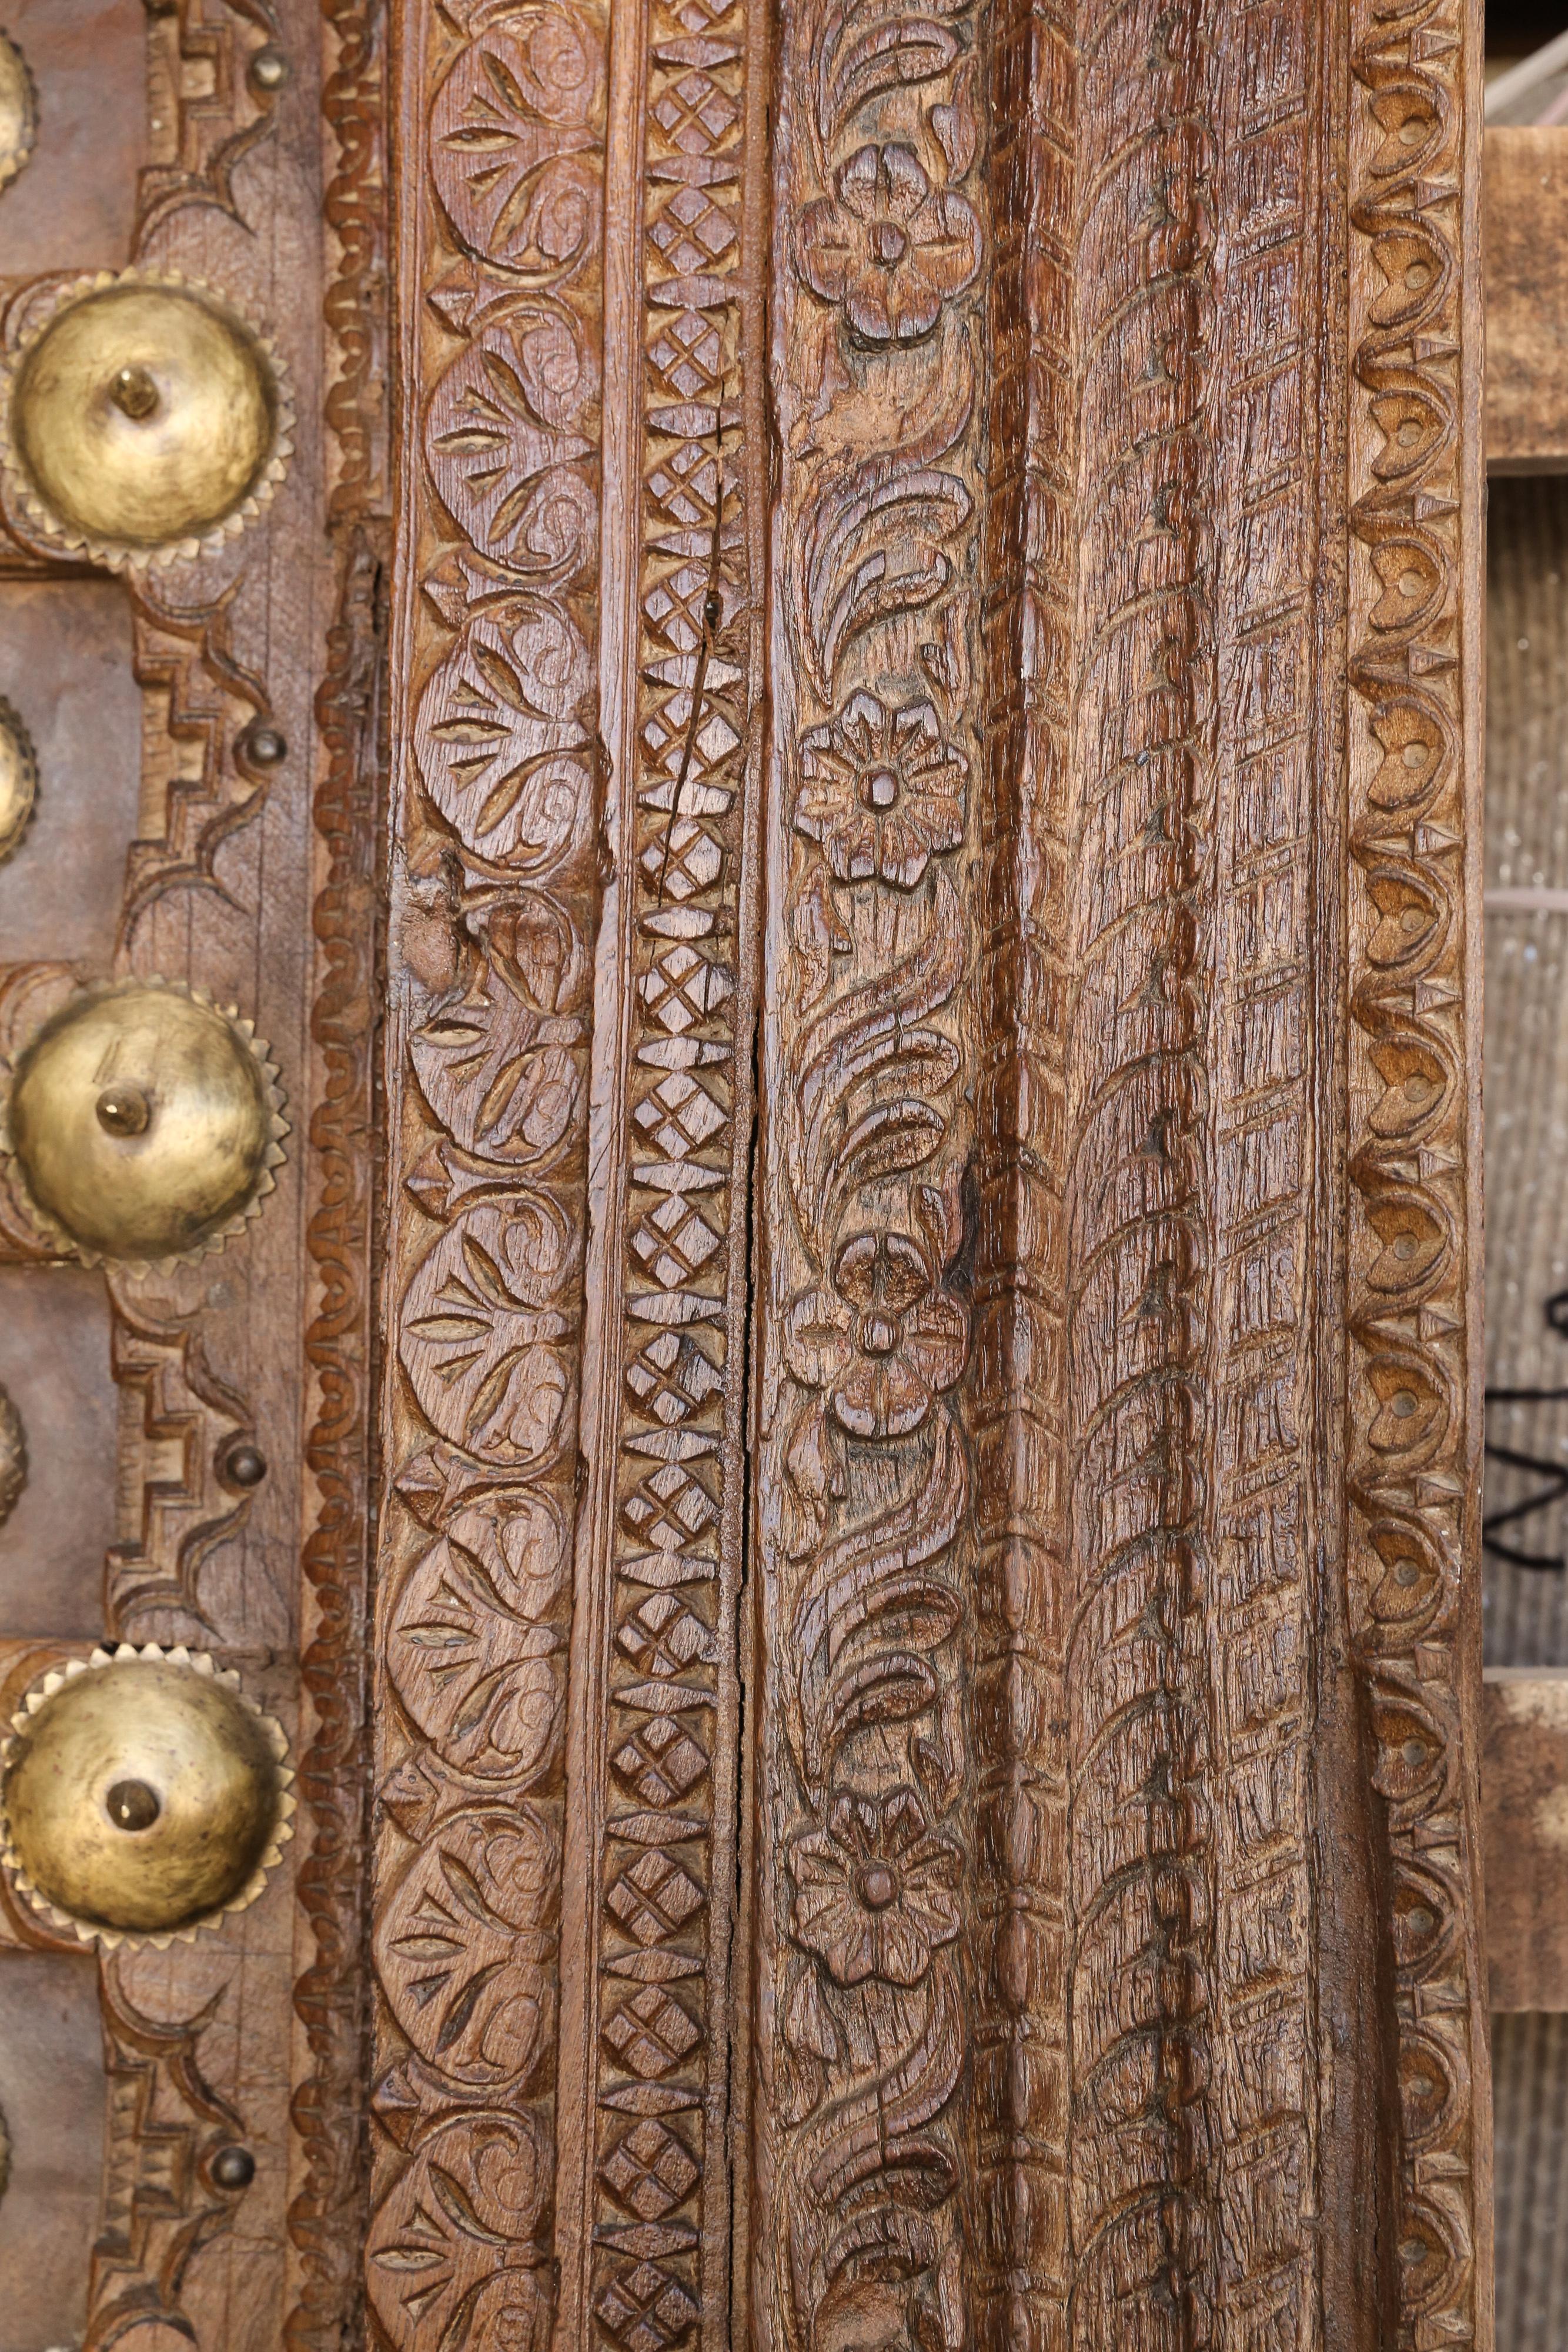 Indian Metal Studded Highly Carved Solid Teak Wood Entry Door of a Temple Priest Home